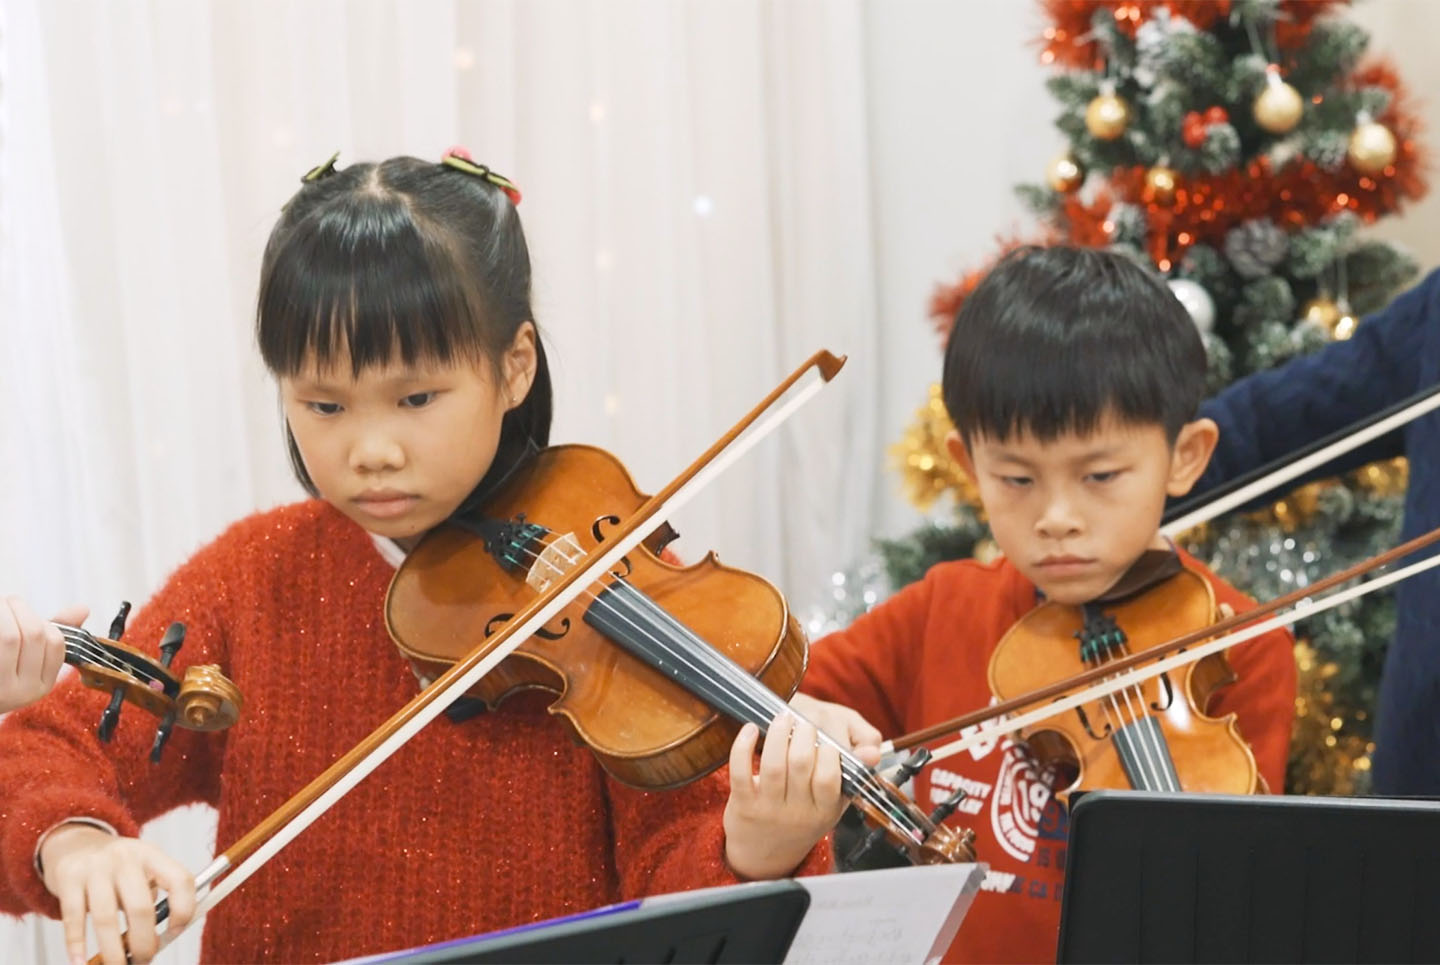 A photo of a boy and a girl dressed in red playing the violin next to a Christmas Tree